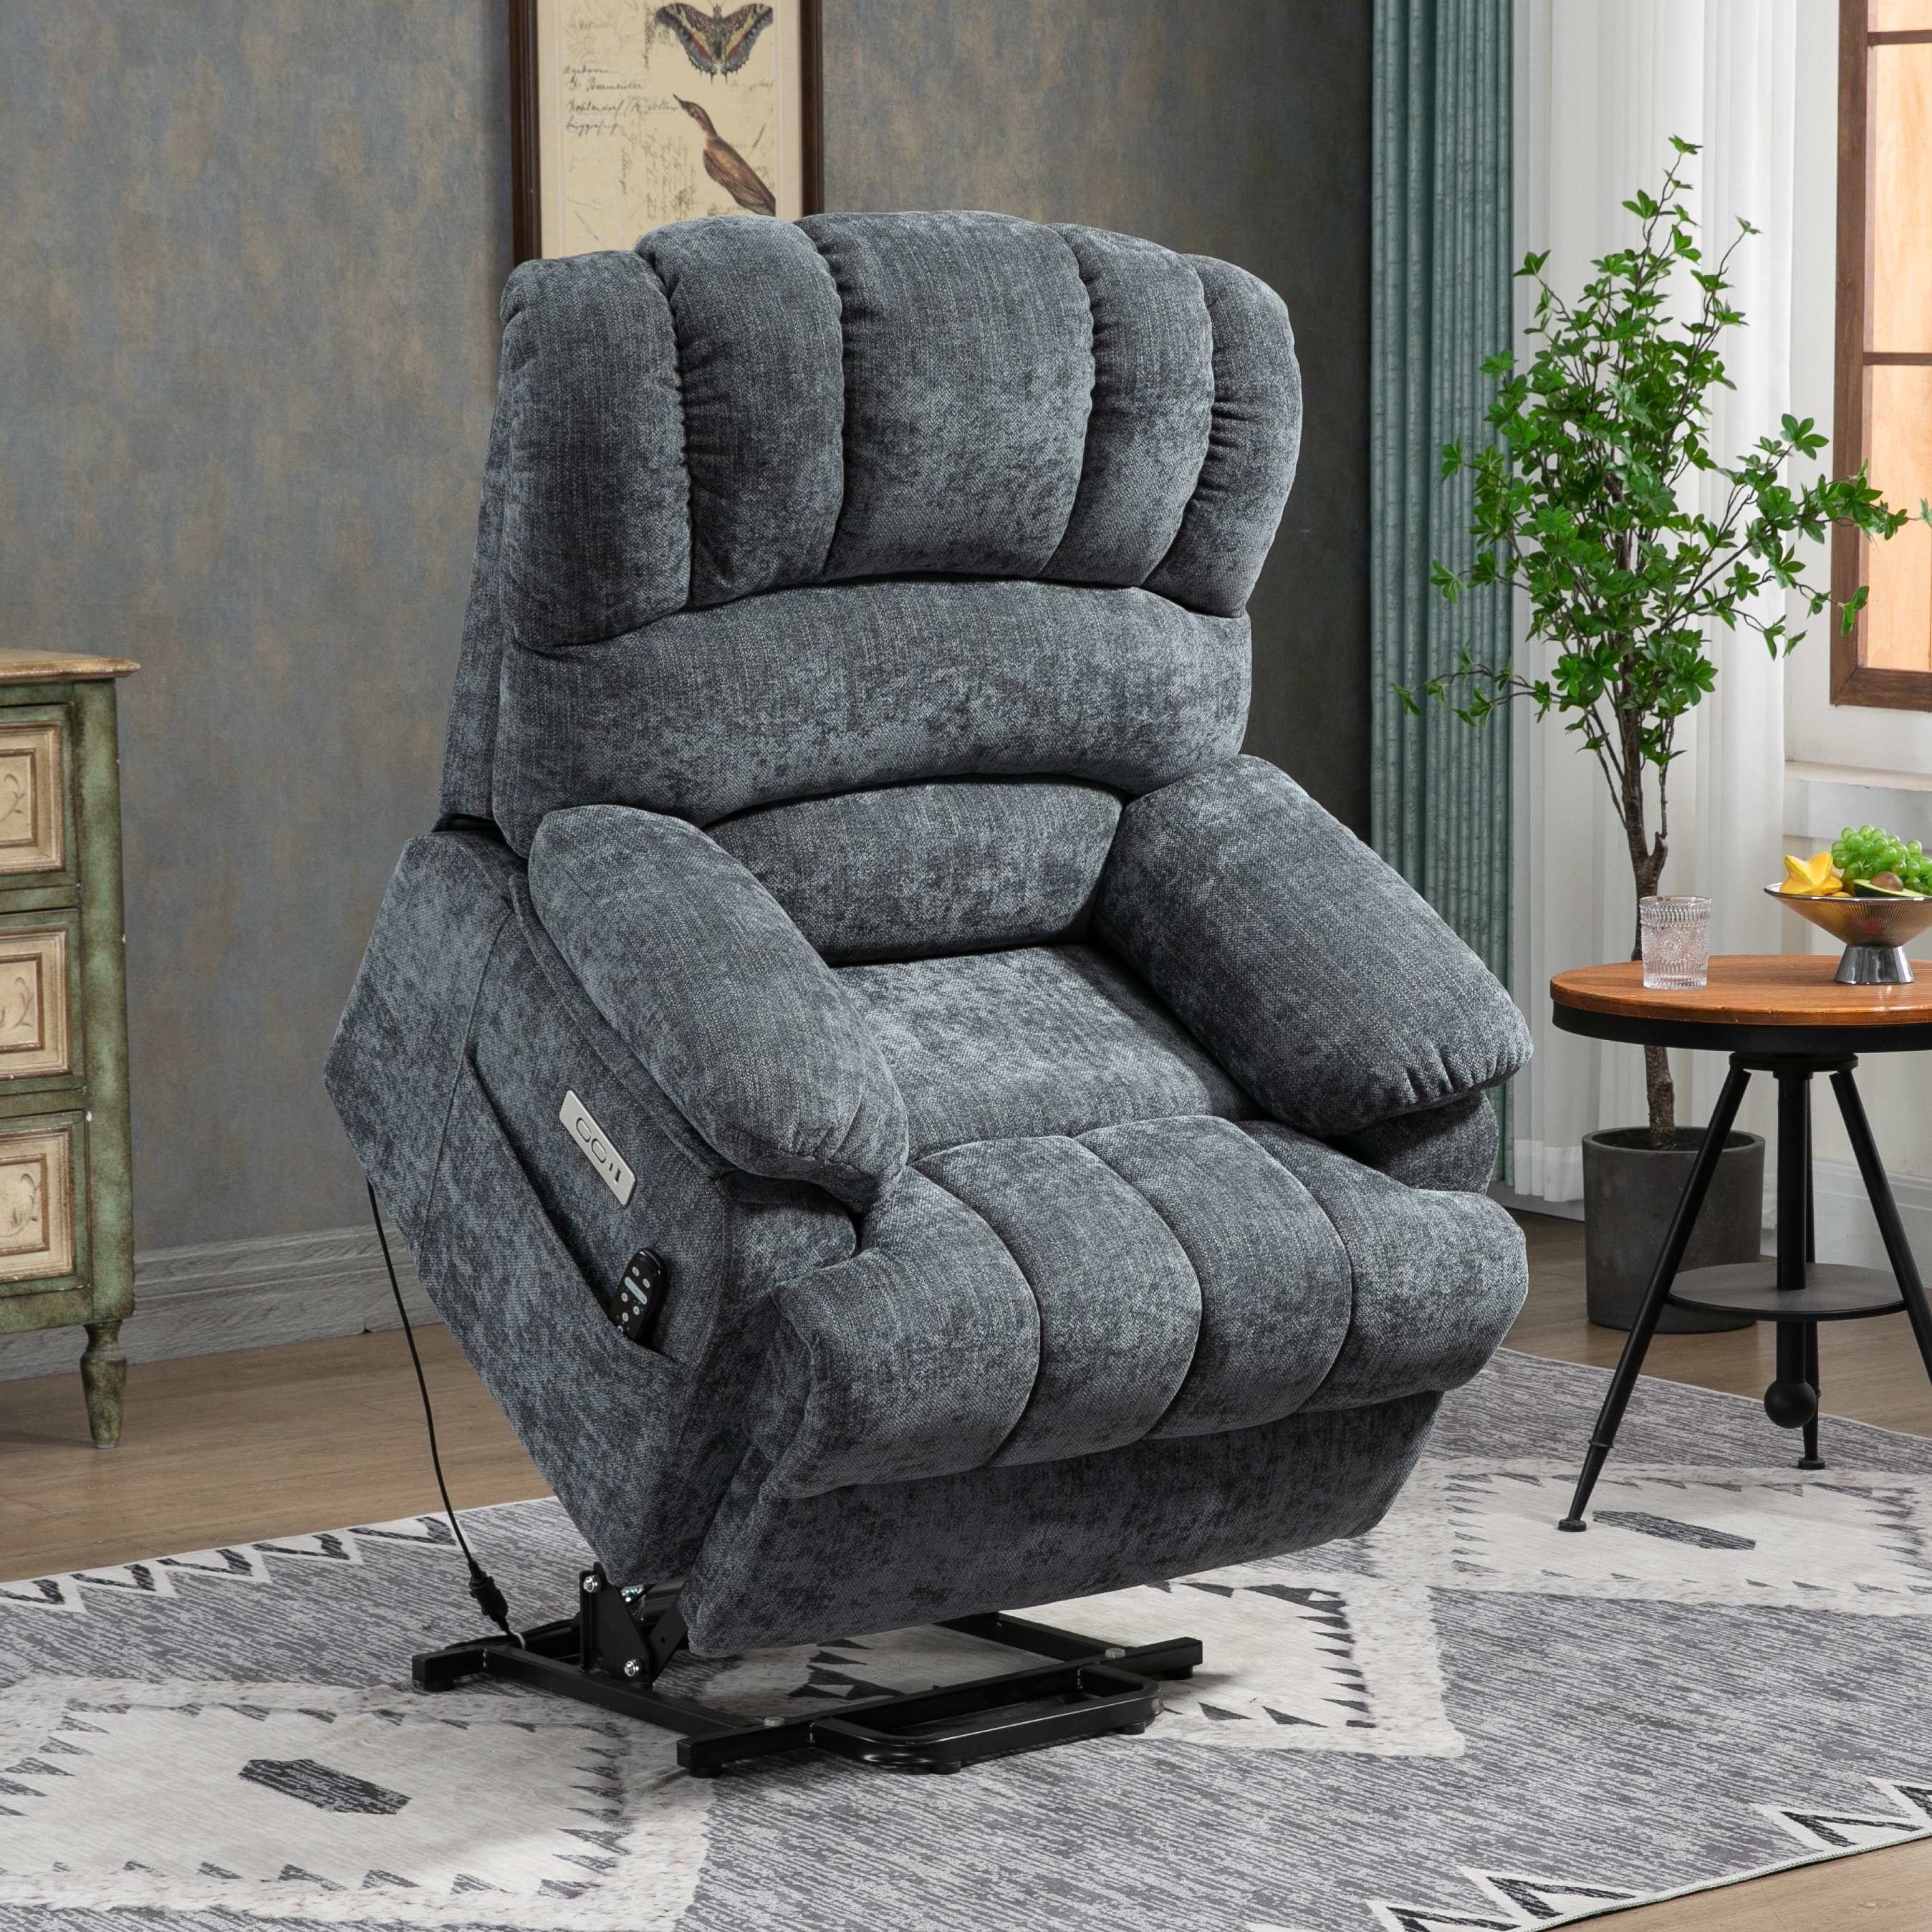 https://ak1.ostkcdn.com/images/products/is/images/direct/825aa516bbcd3efd6a6821a76bf8815504d4c177/Blue-Gray-Chenille-Oversized-Power-Lift-Recliner-Chair-with-Massage%2C-Heating.jpg